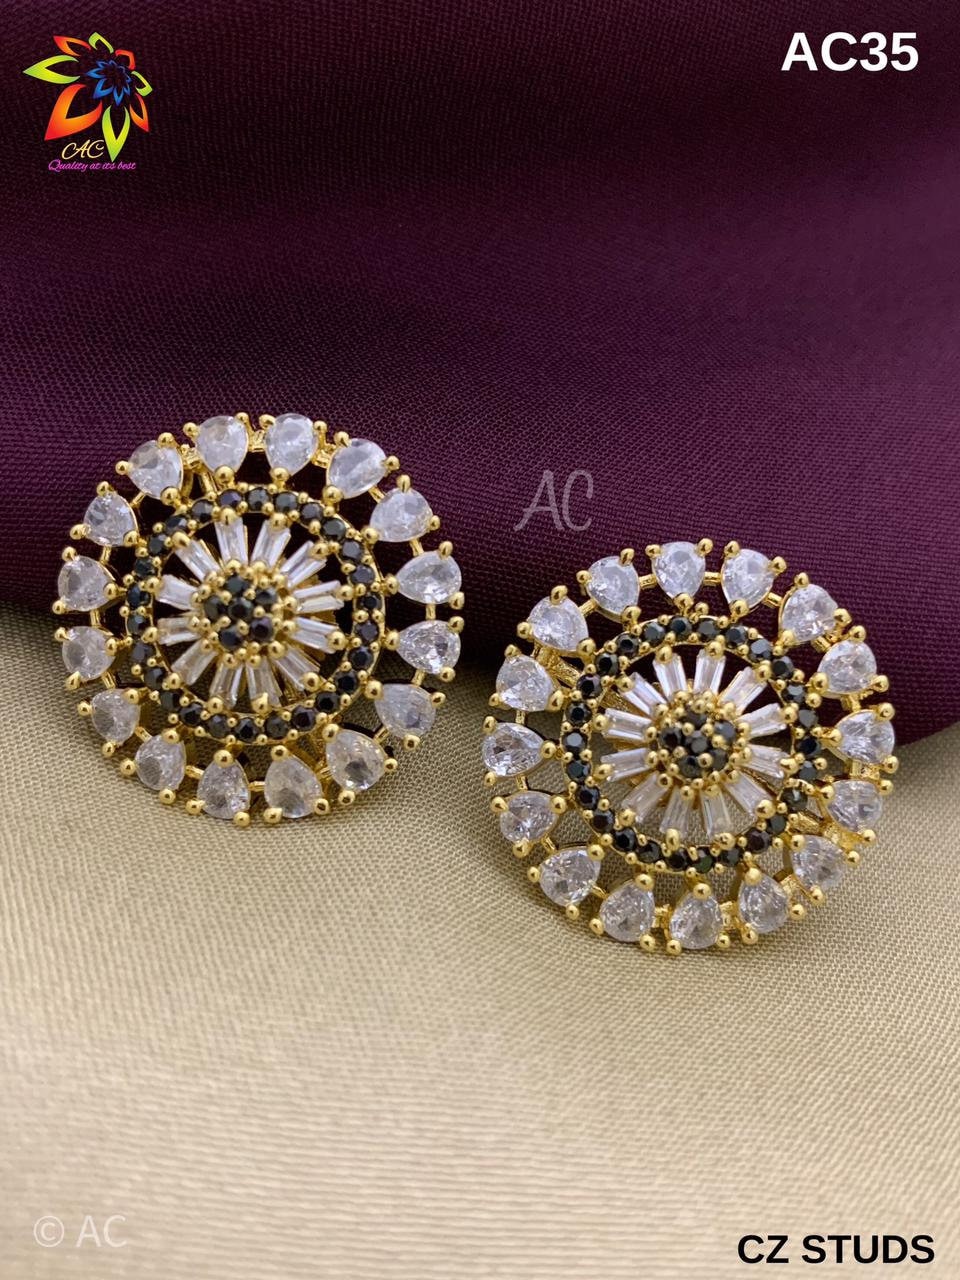 clearance / SALE Gold finish Big stud earrings - Indian style earrings, Stonework Studs